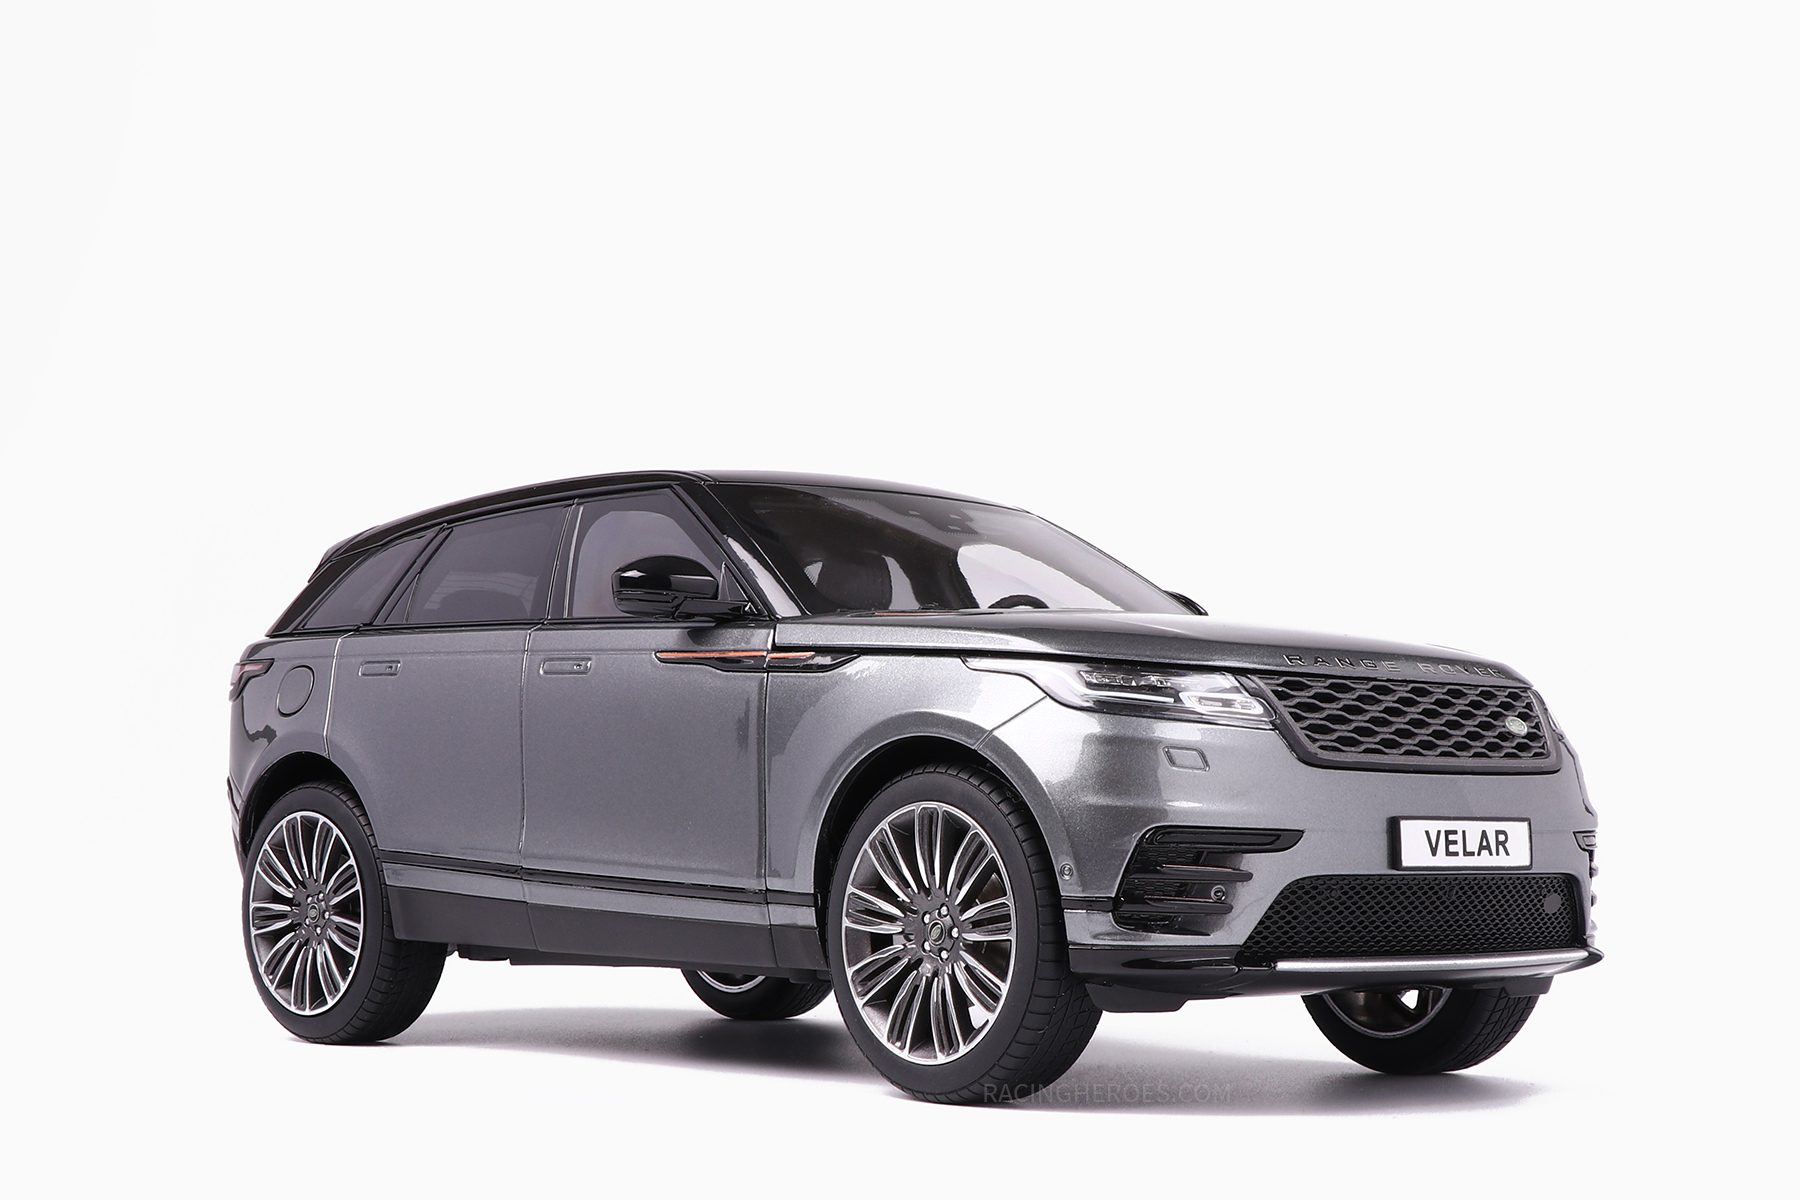 Range Rover Velar First Edition - Gray 1:18 by LCD Models